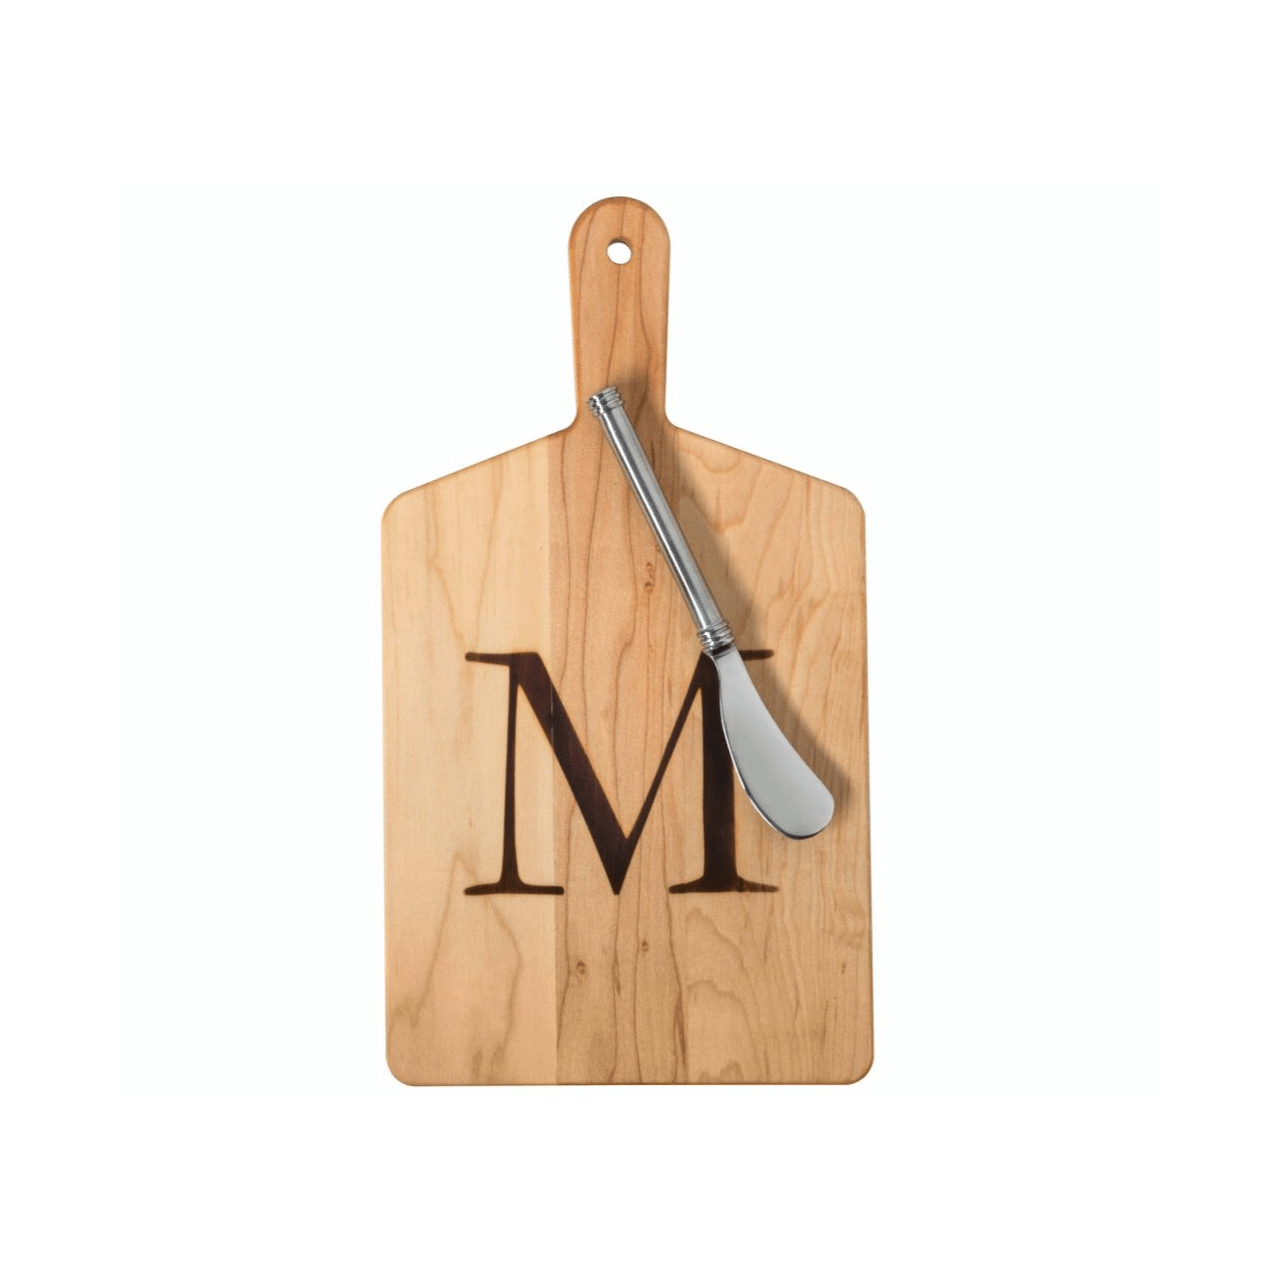 Maple Cheese Board with a Stamped M and Metal Spreader